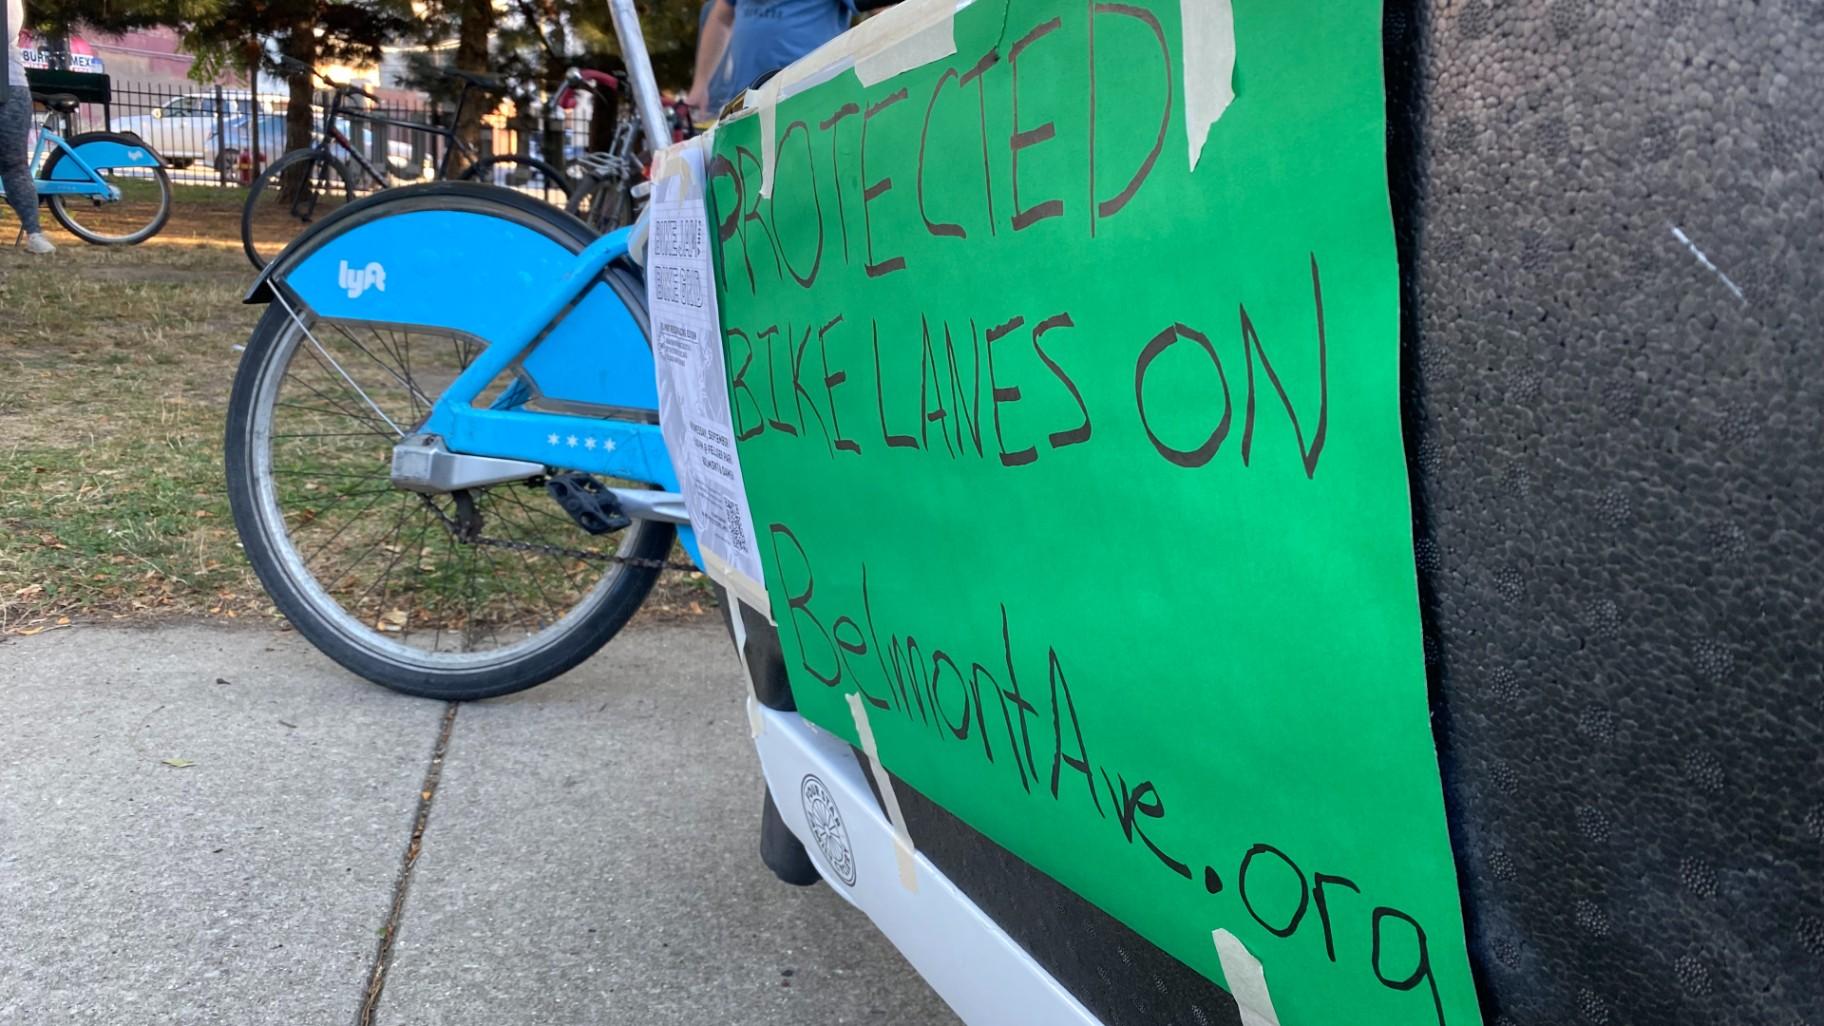 Advocates rally in Roscoe Village’s Fellger Park on Sept. 7, 2022, calling on the city to include more infrastructure upgrades for cyclists, bus passengers, and pedestrians during an upcoming resurfacing of Belmont Avenue. (Nick Blumberg / WTTW News)